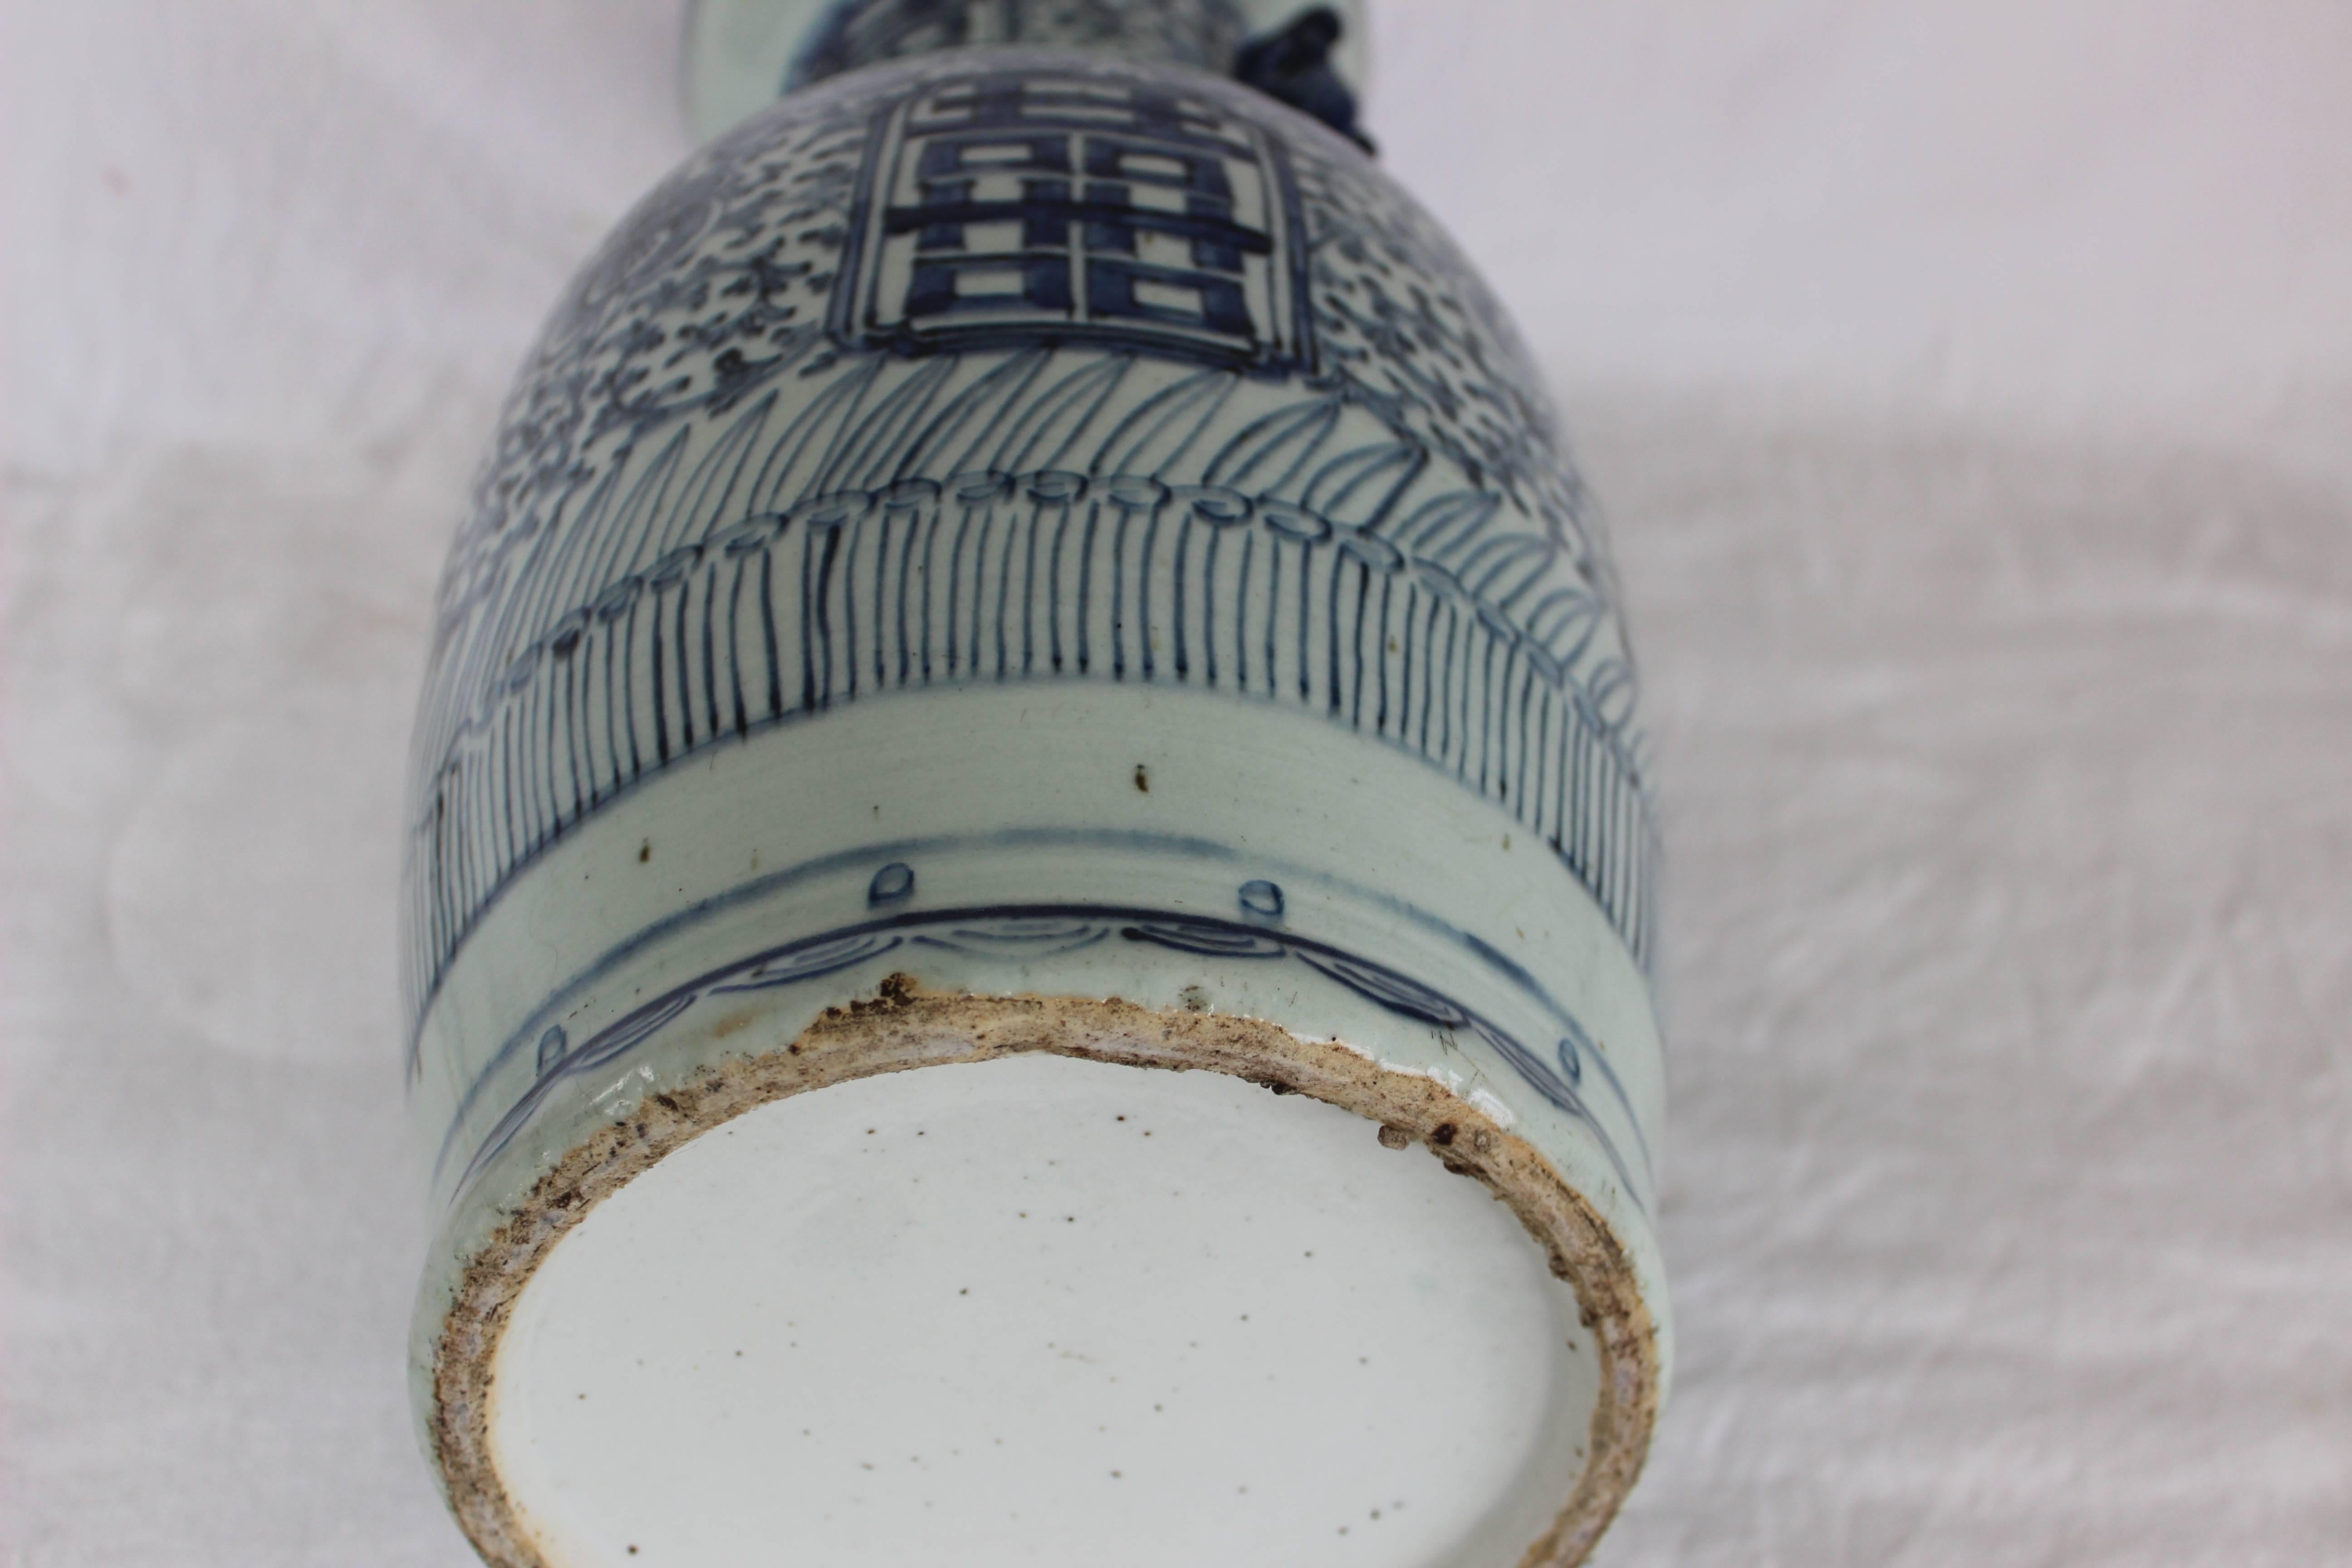 20th Century Chinese Blue and White Vase